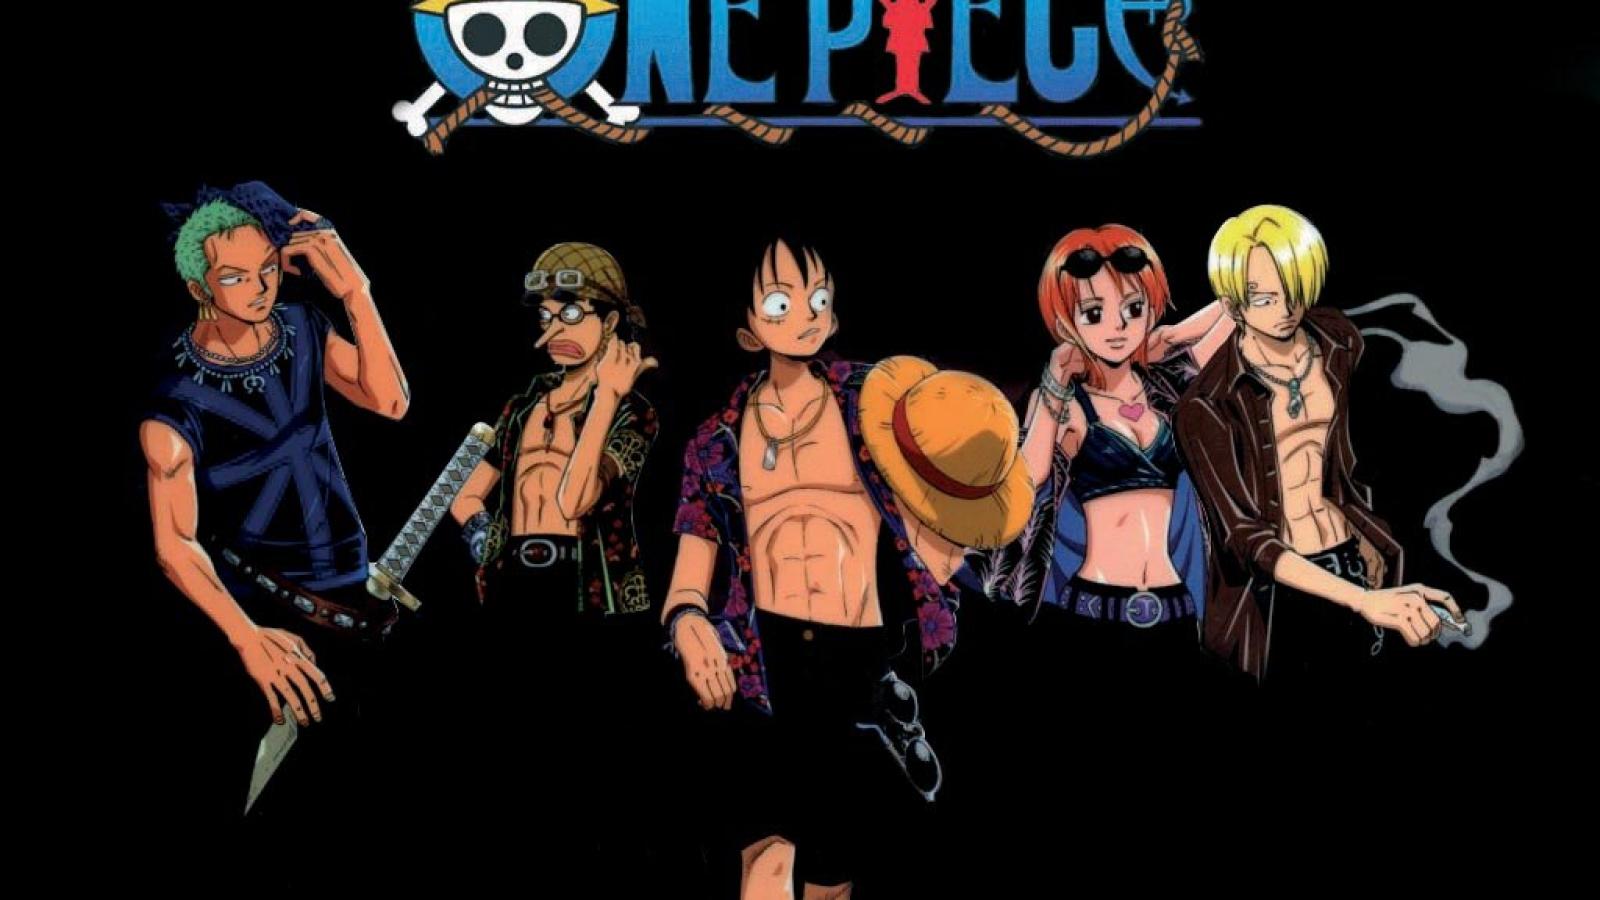 One piece wallpaper hd nocturnar com - (#24483) - High Quality and ...